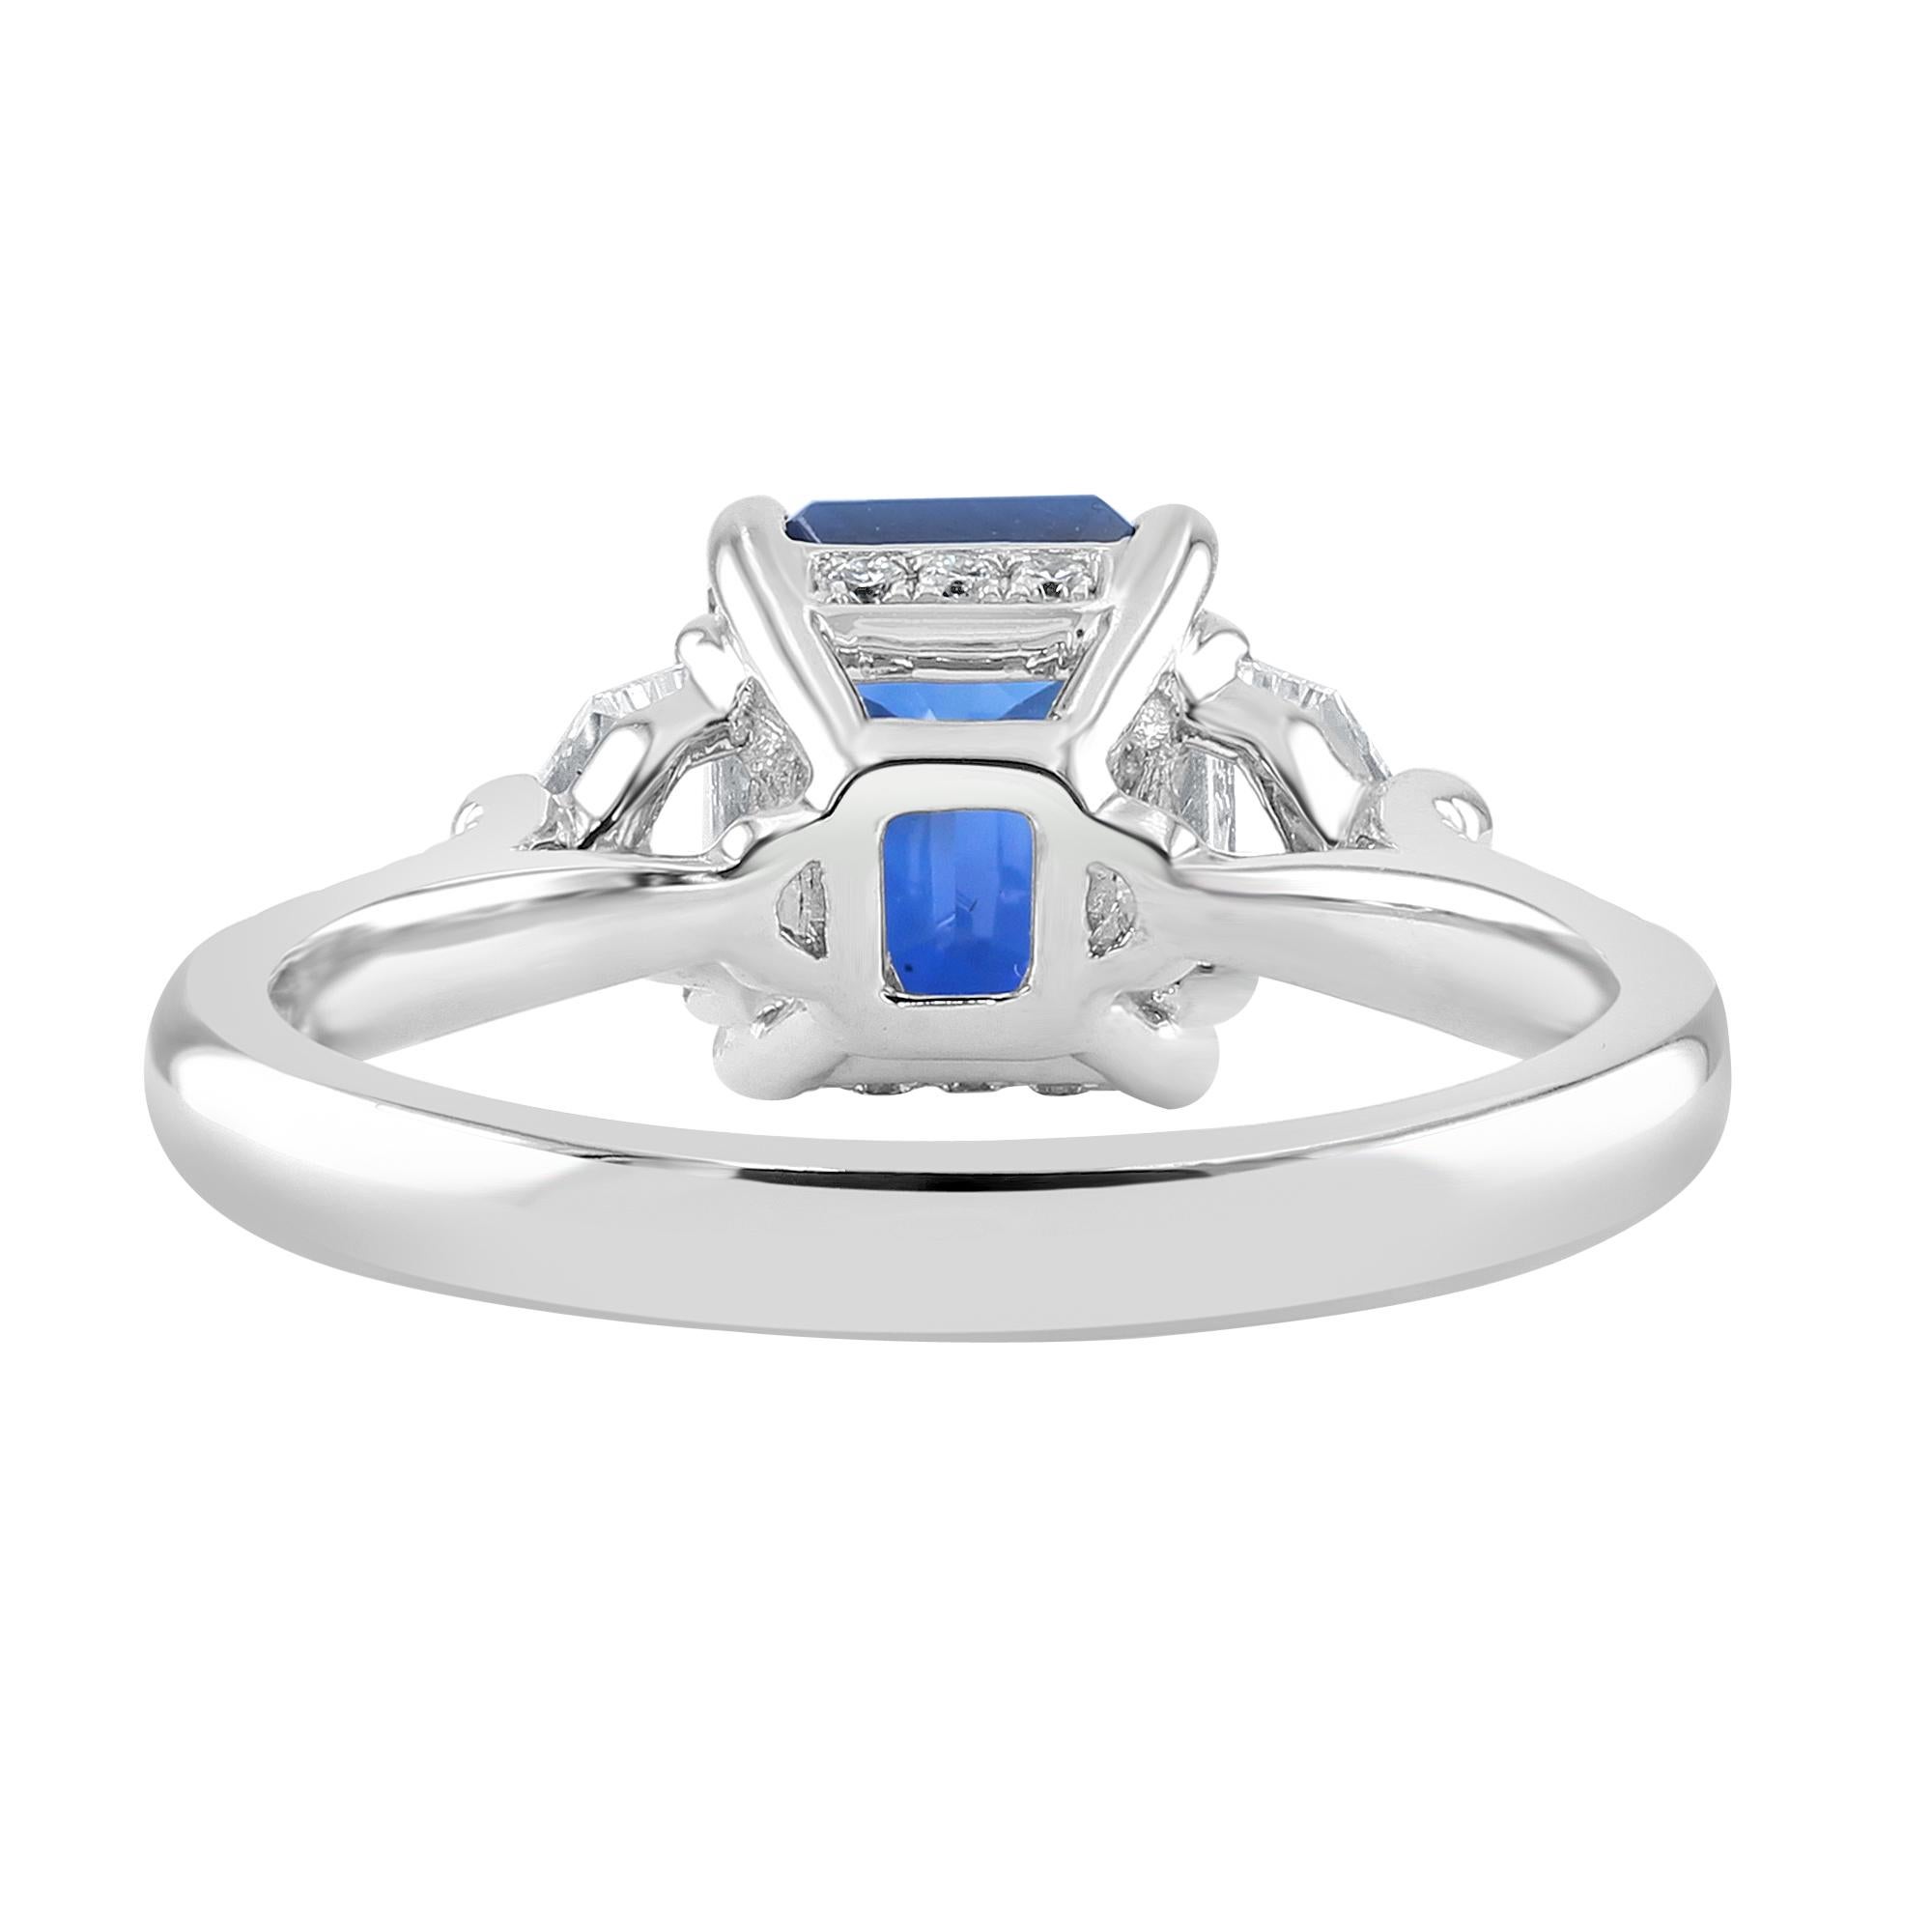 Emerald Cut 2.19 Carat Sapphire and Diamond White Gold Engagement Ring For Sale